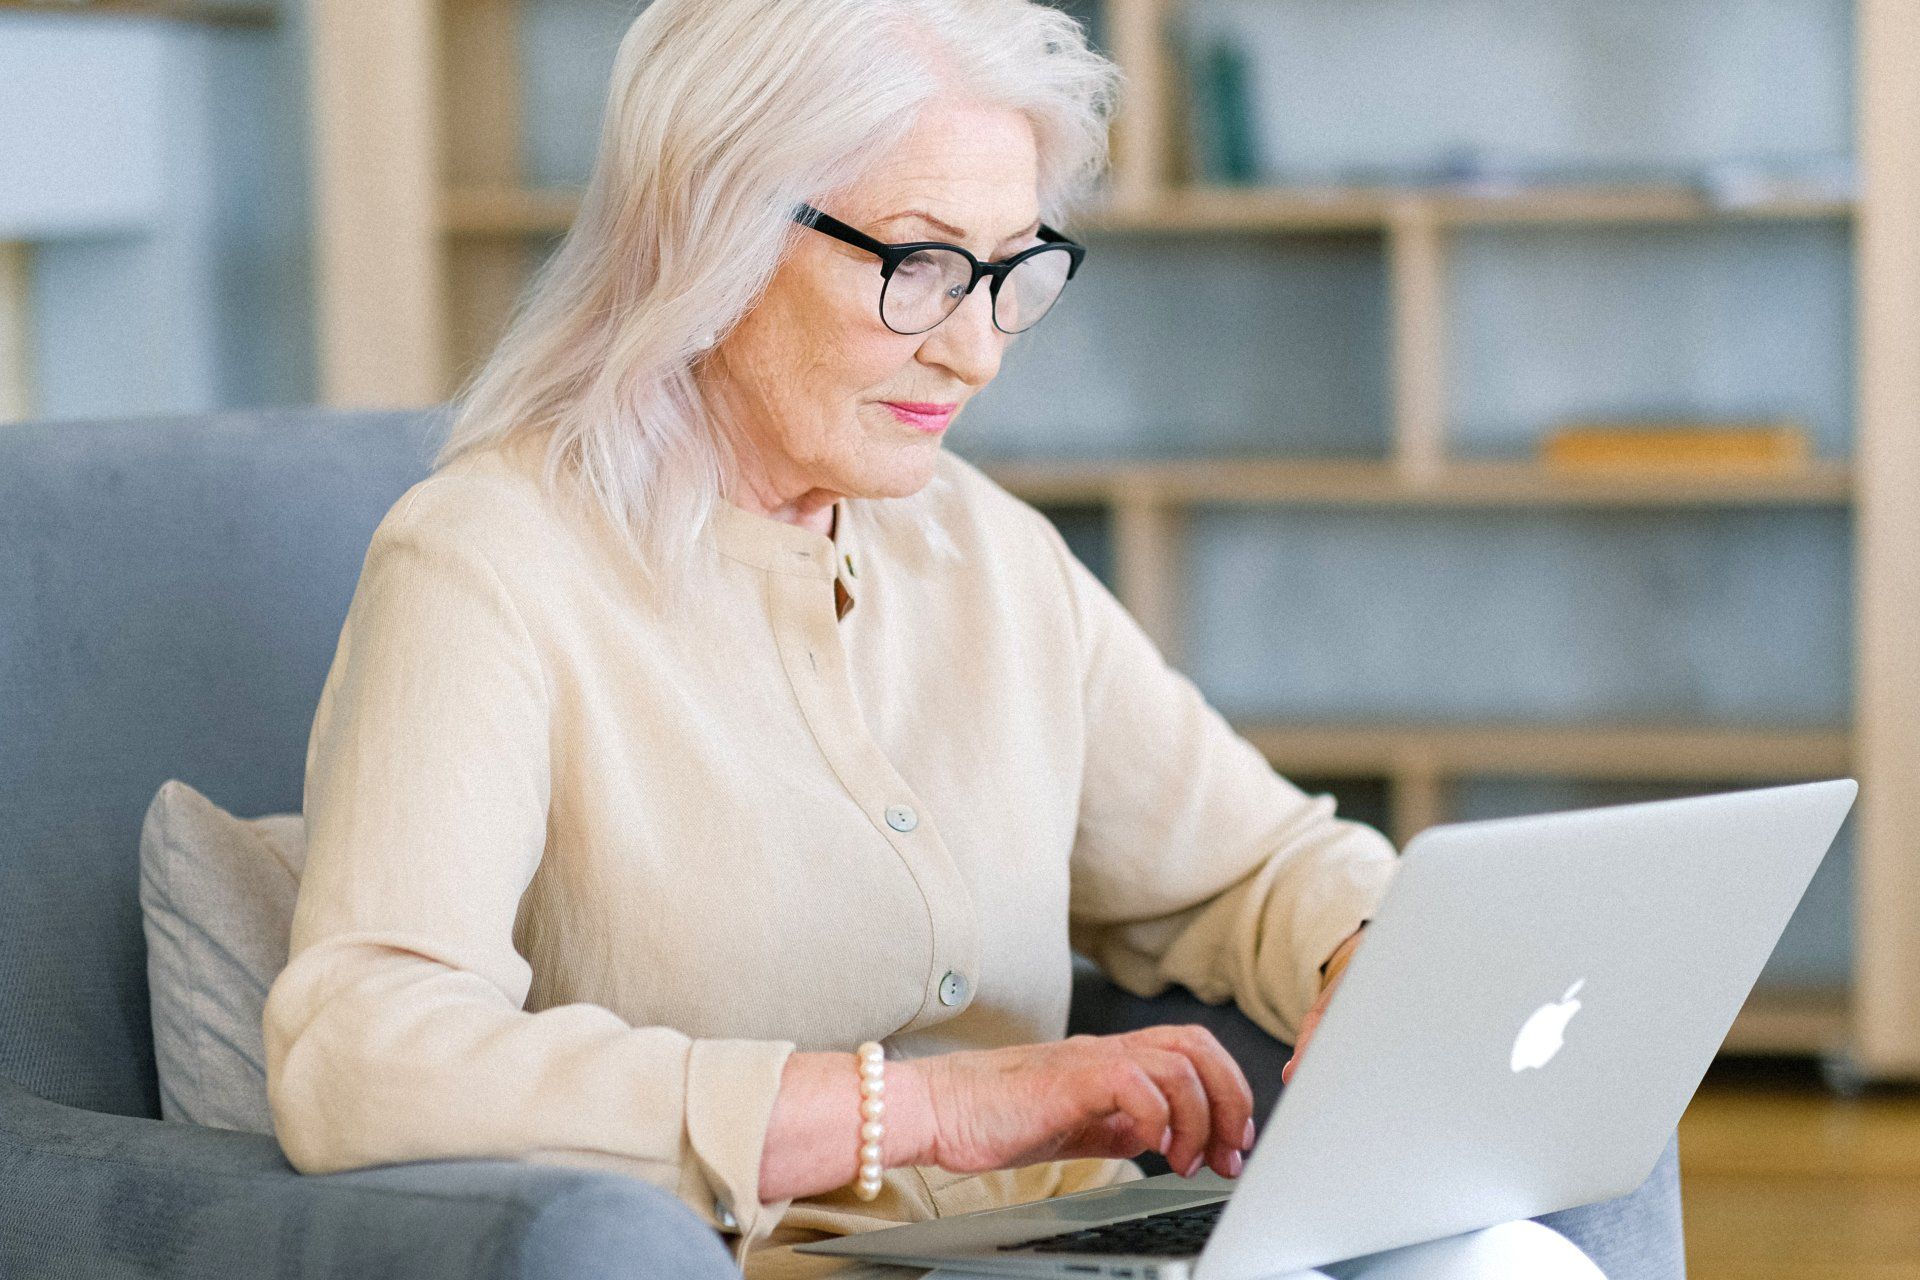 Keep your LinkedIn profile active when retiring